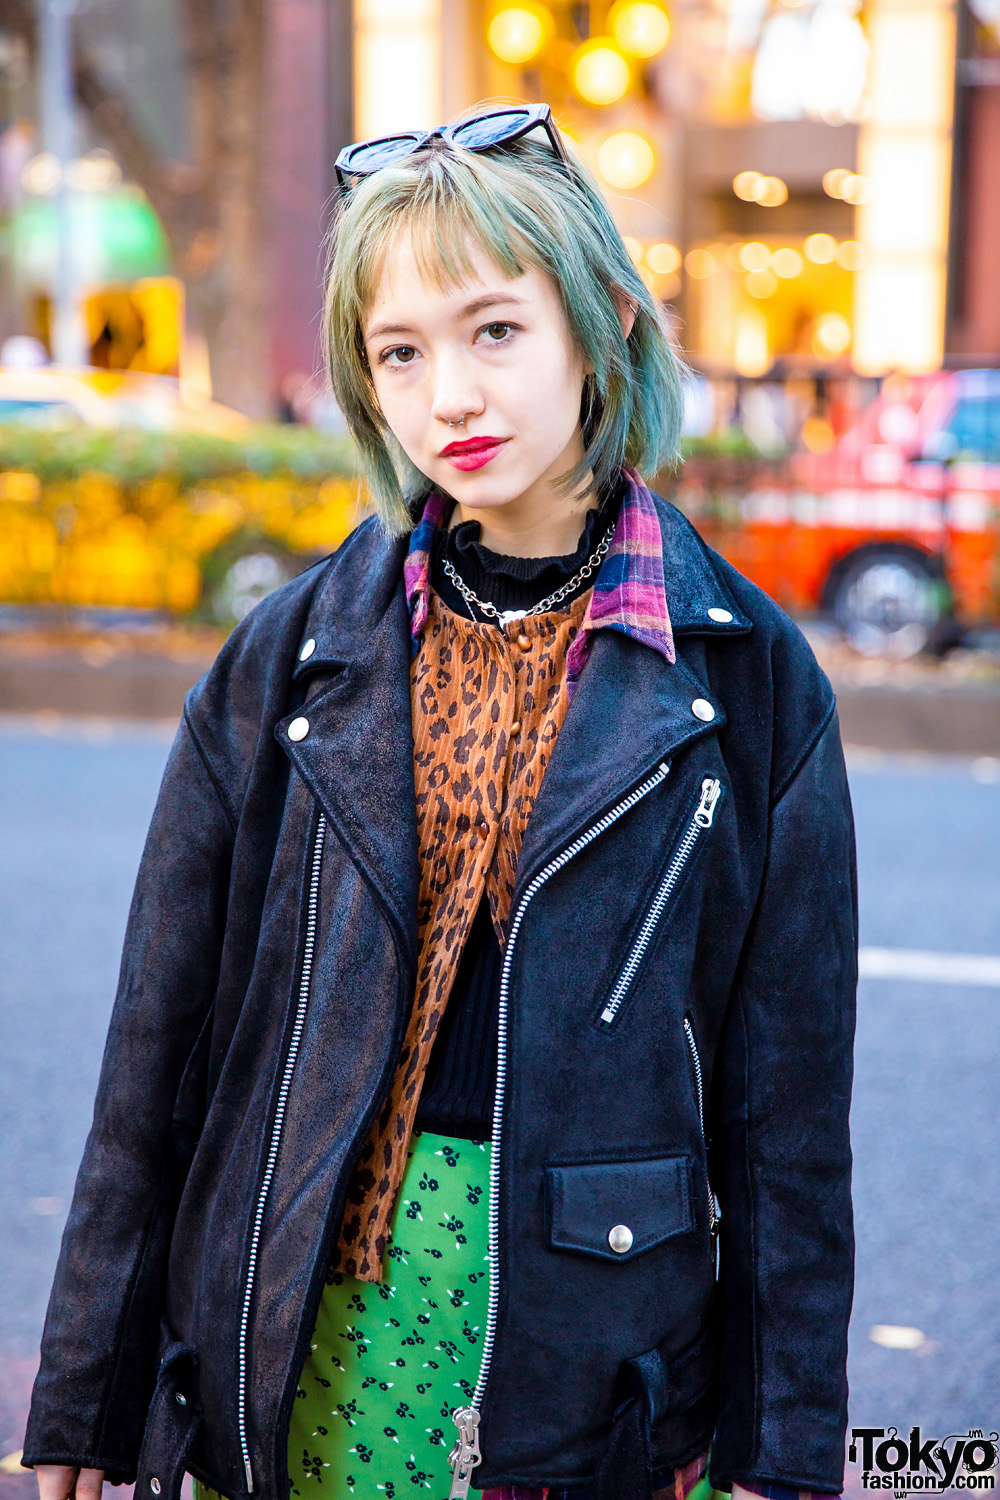 Japanese Model’s X-Girl Street Style w/ Ombre Bob, Suede Jacket, Floral ...